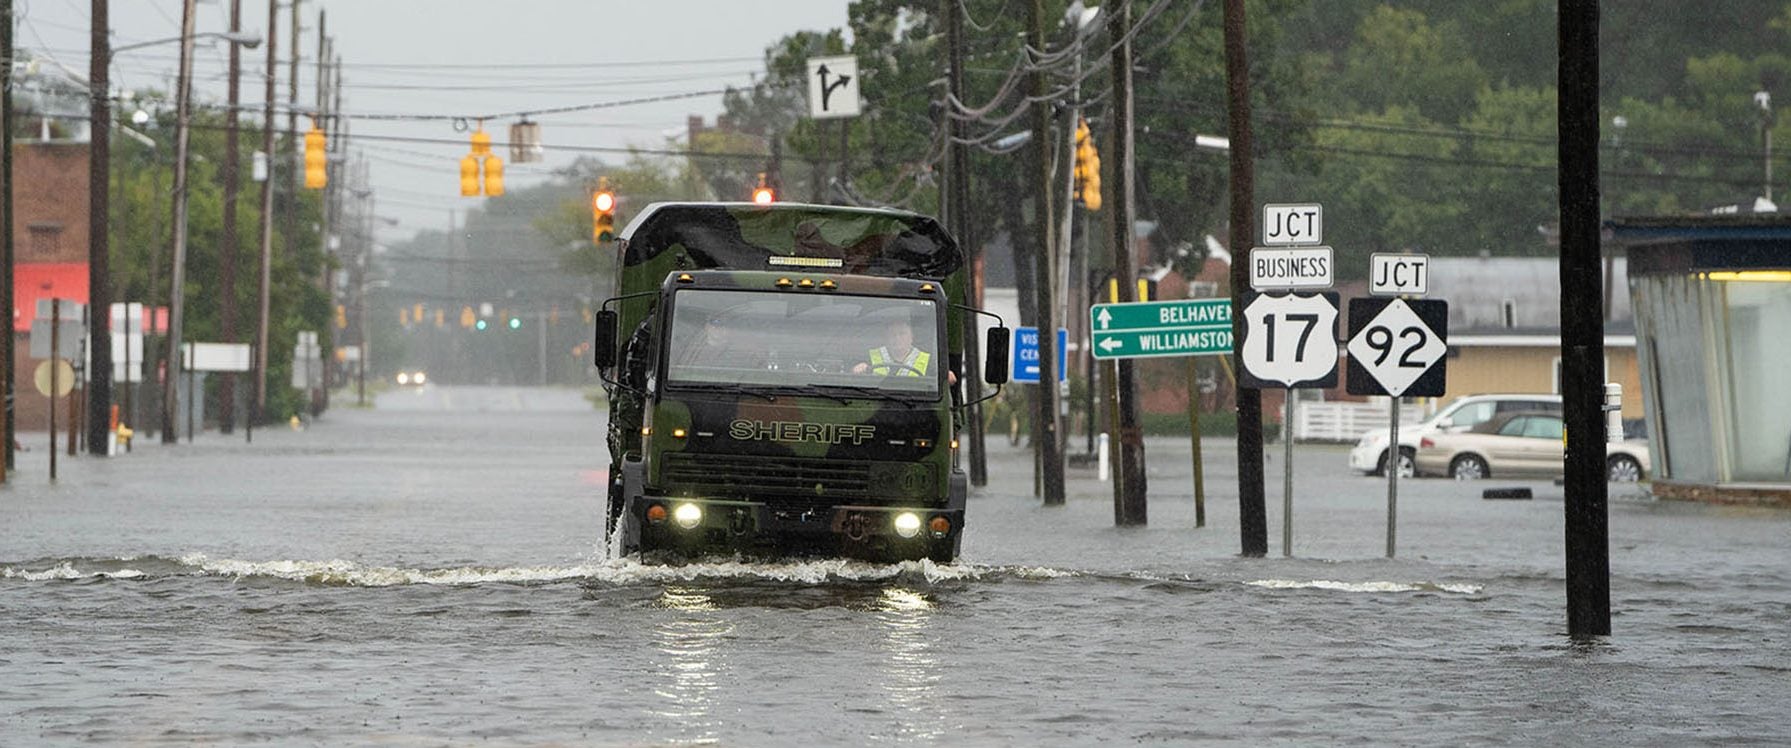 A sheriff’s department truck drives through floodwaters during Hurricane Florence in Washington, N.C. in 2018. New courses offered by the ECU College of Nursing will prepare advanced nurses to lead communities and health care organizations to quickly find solutions and reduce suffering during natural disasters. (Photo by Cliff Hollis)